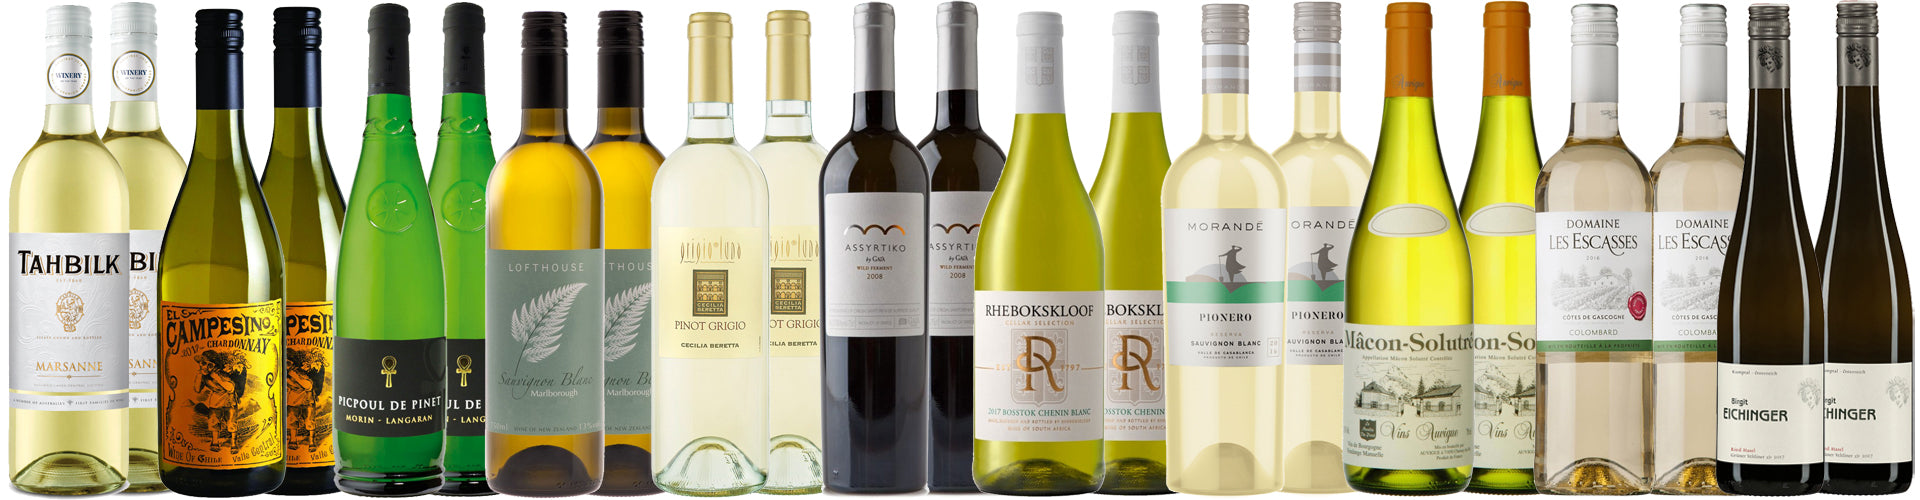 Collection of White Wine Bottles in various styles and grape varieties